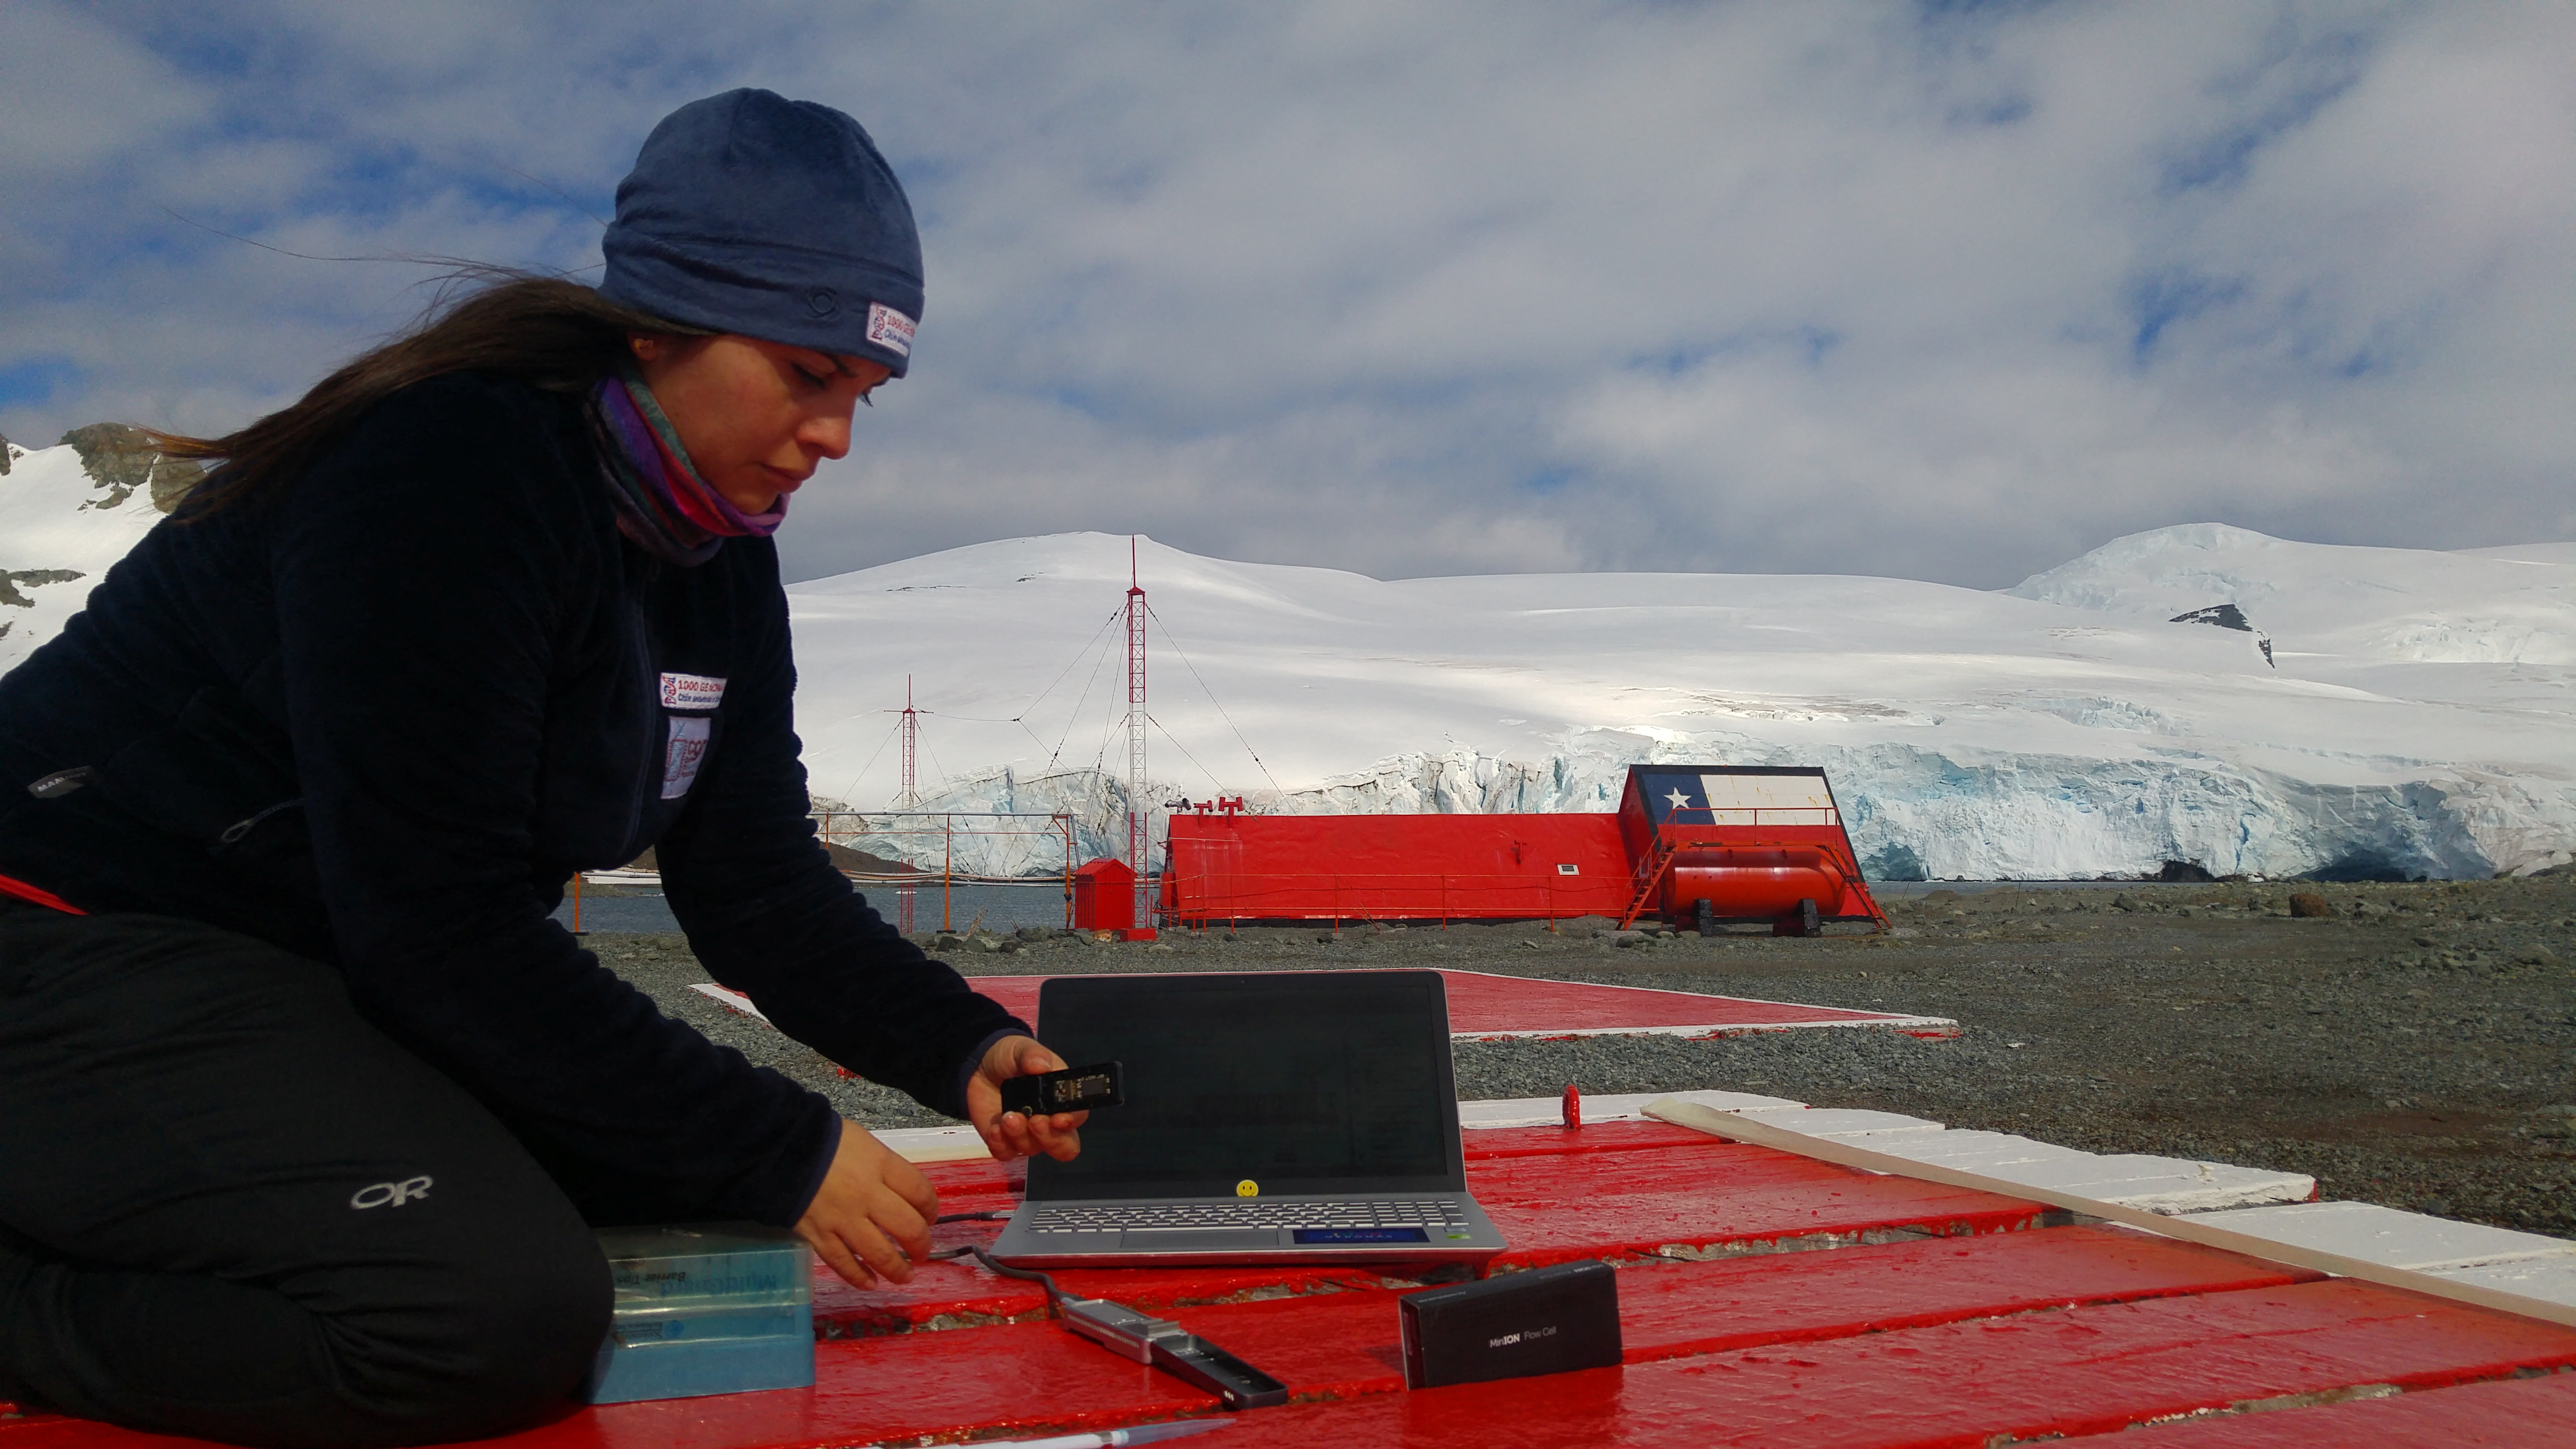 A scientist from the University of Chile works on his laptop as he checks organic material looking for a bacteria discovered in Antarctica